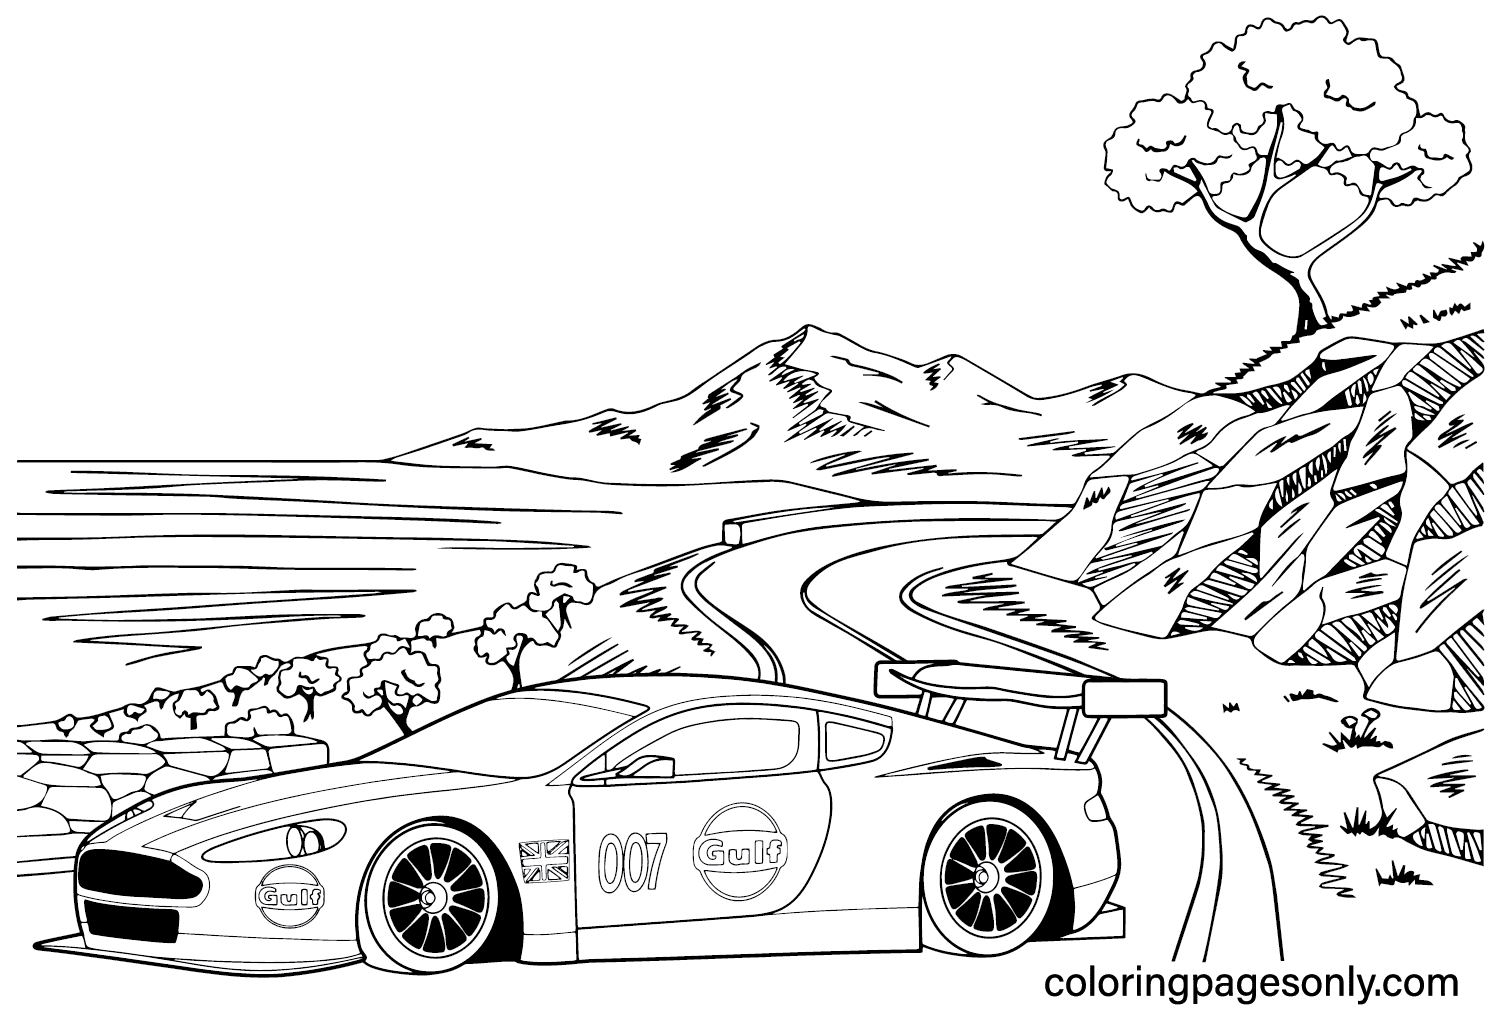 2005 Aston Martin DBR9 Coloring Page from Aston Martin